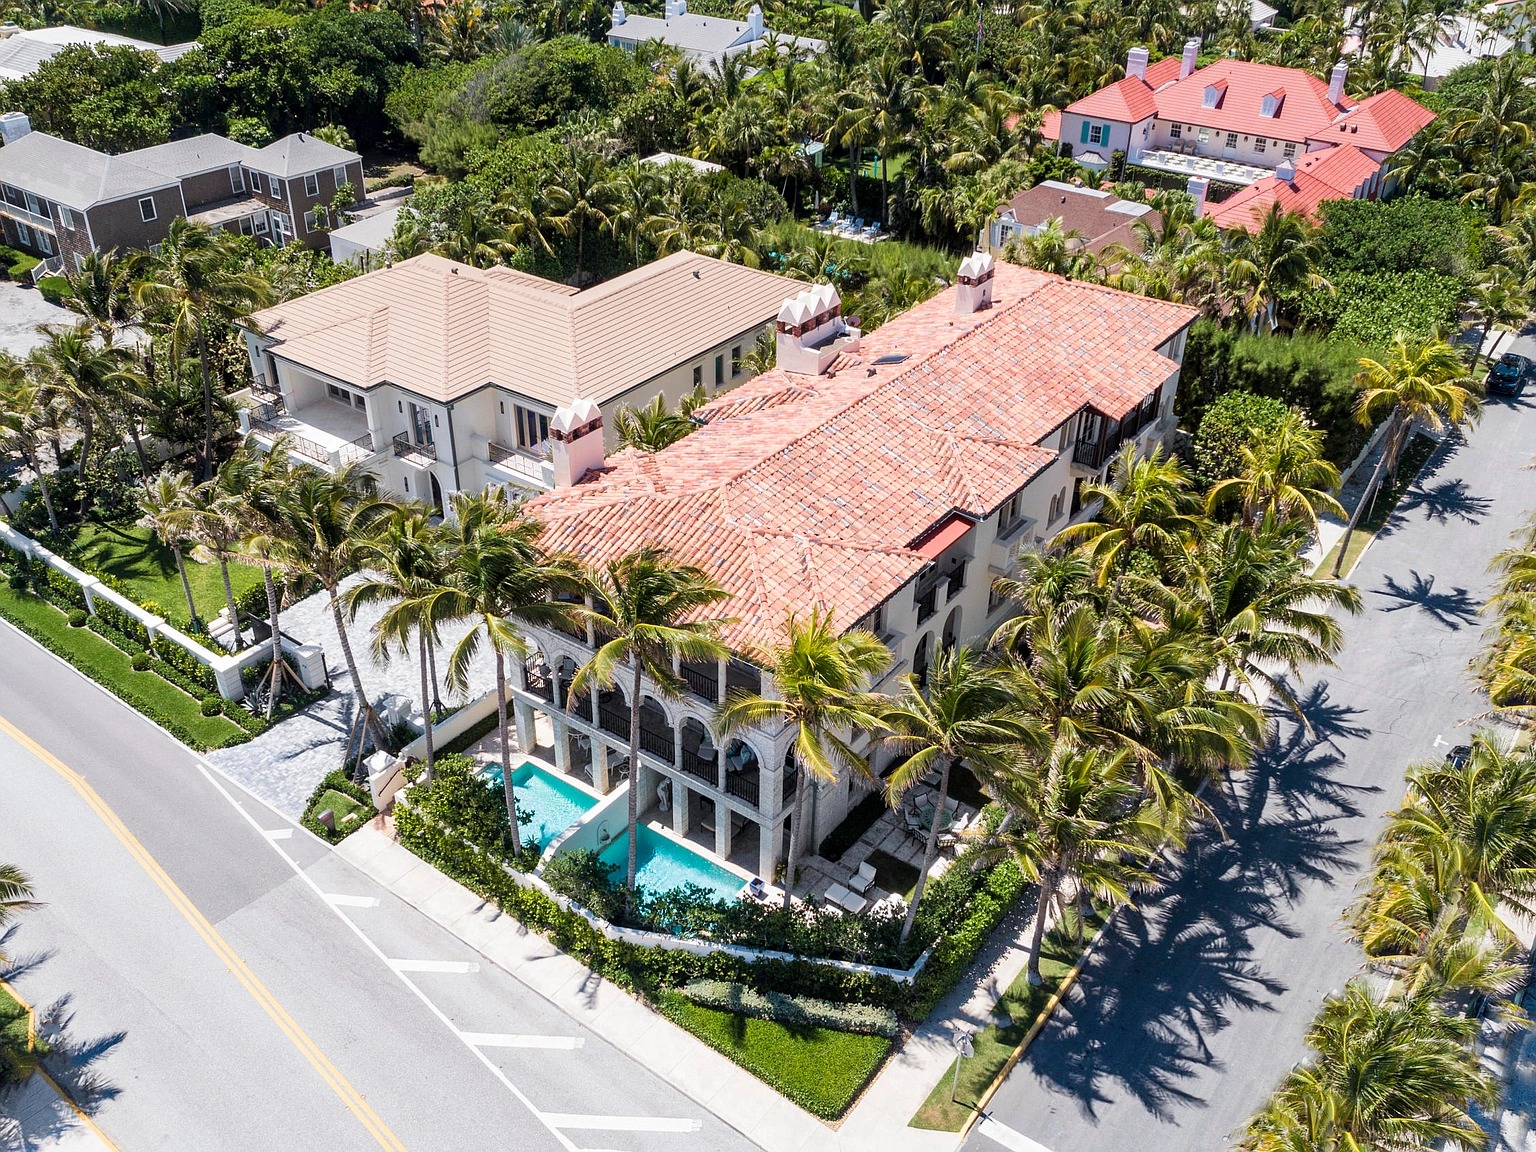 104 Gulfstream Rd, Palm Beach, FL 33480 - $14,490,000 home for sale, house images, photos and pics gallery